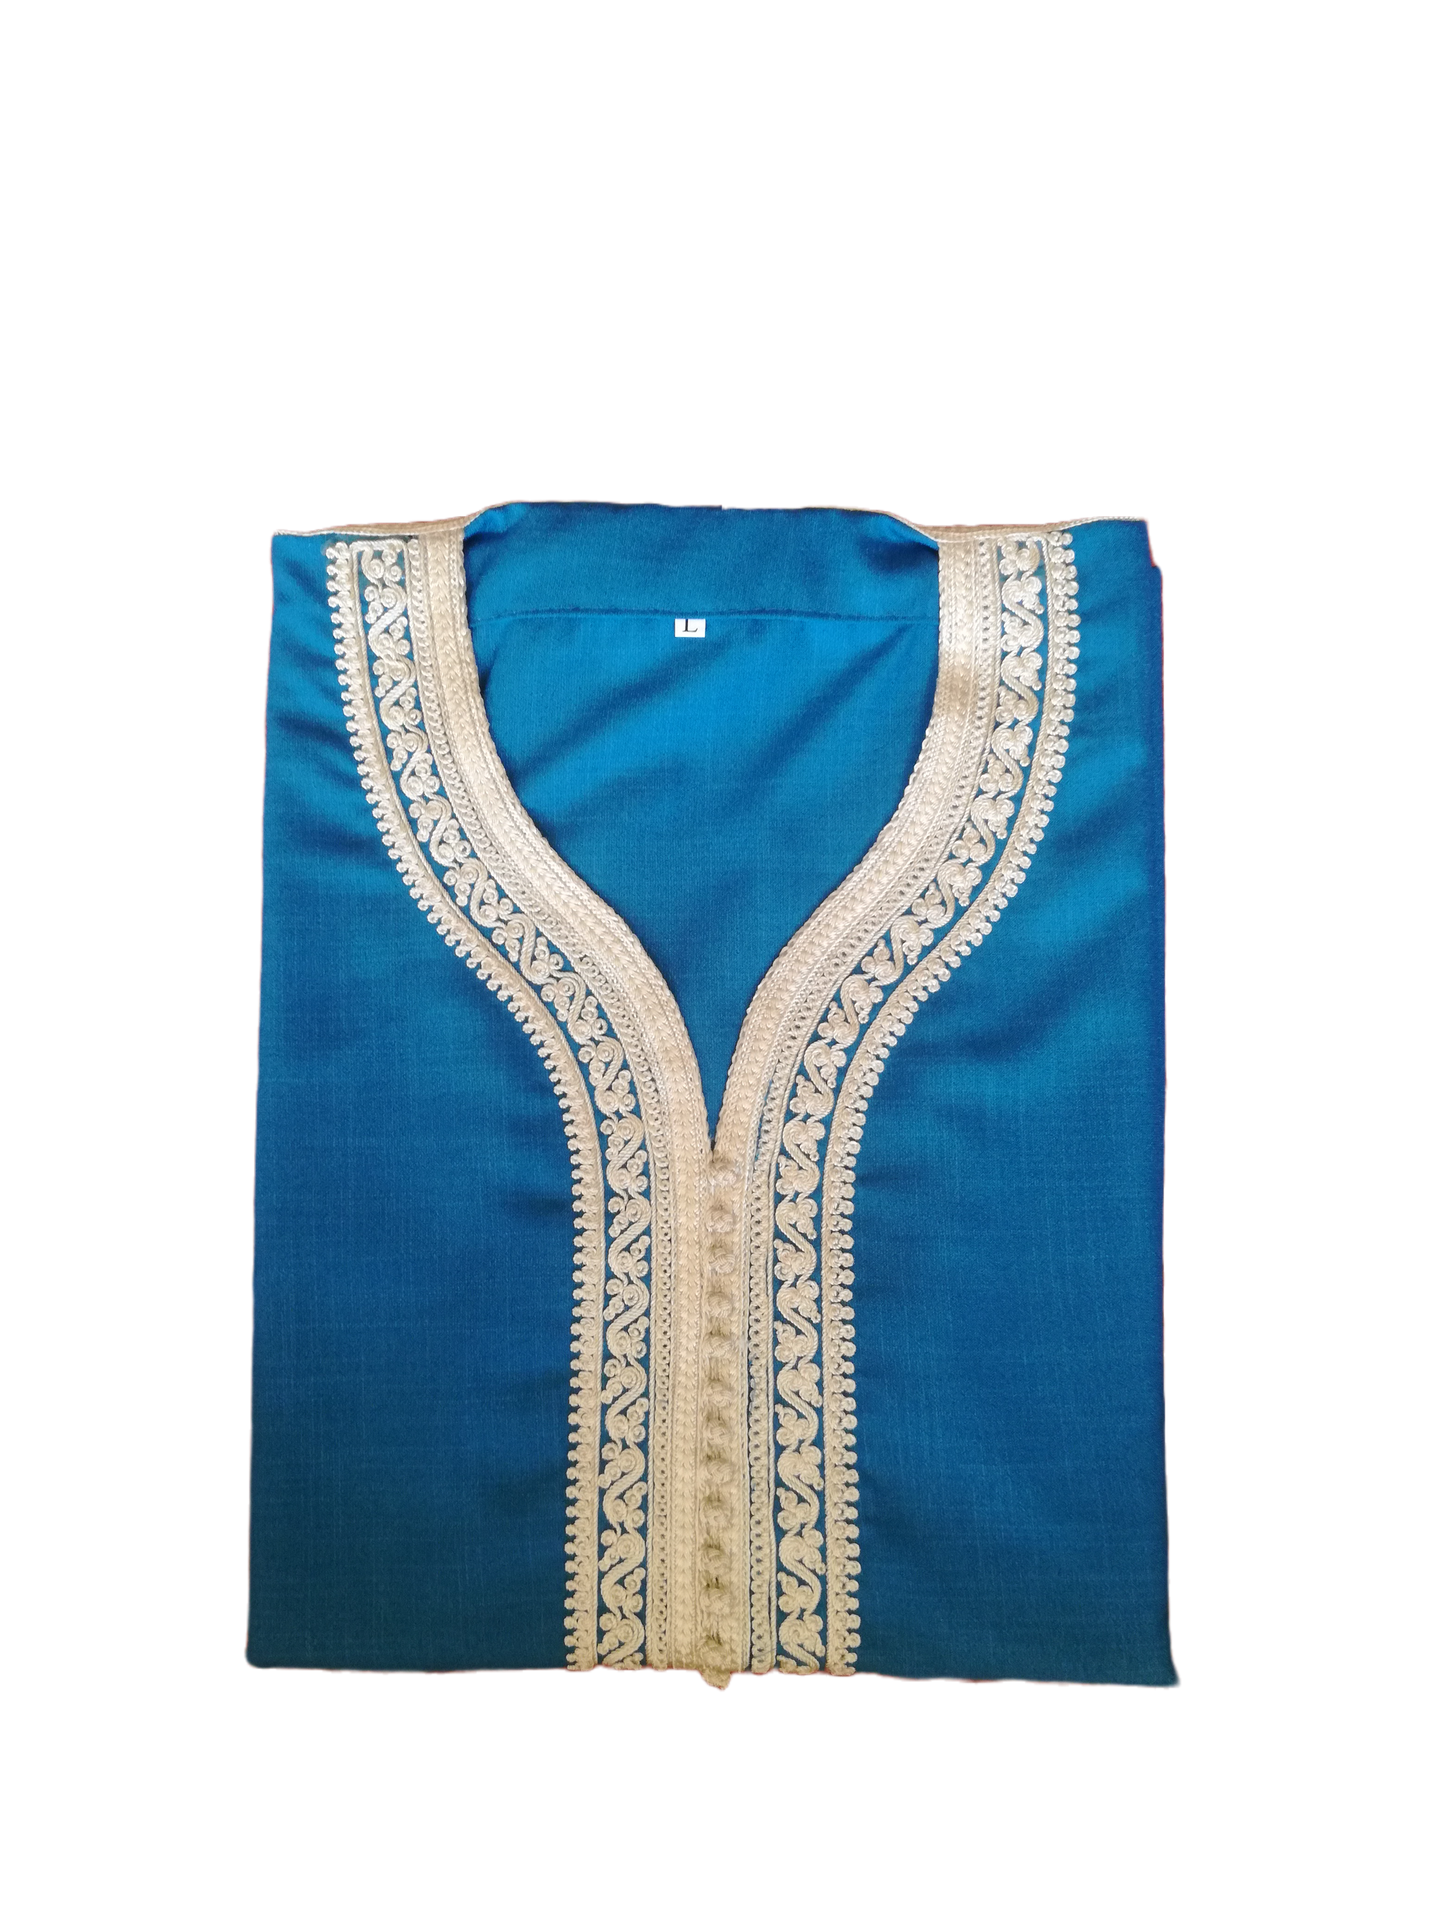 Blue Embroidered Morrocan Thobe/Jubbah